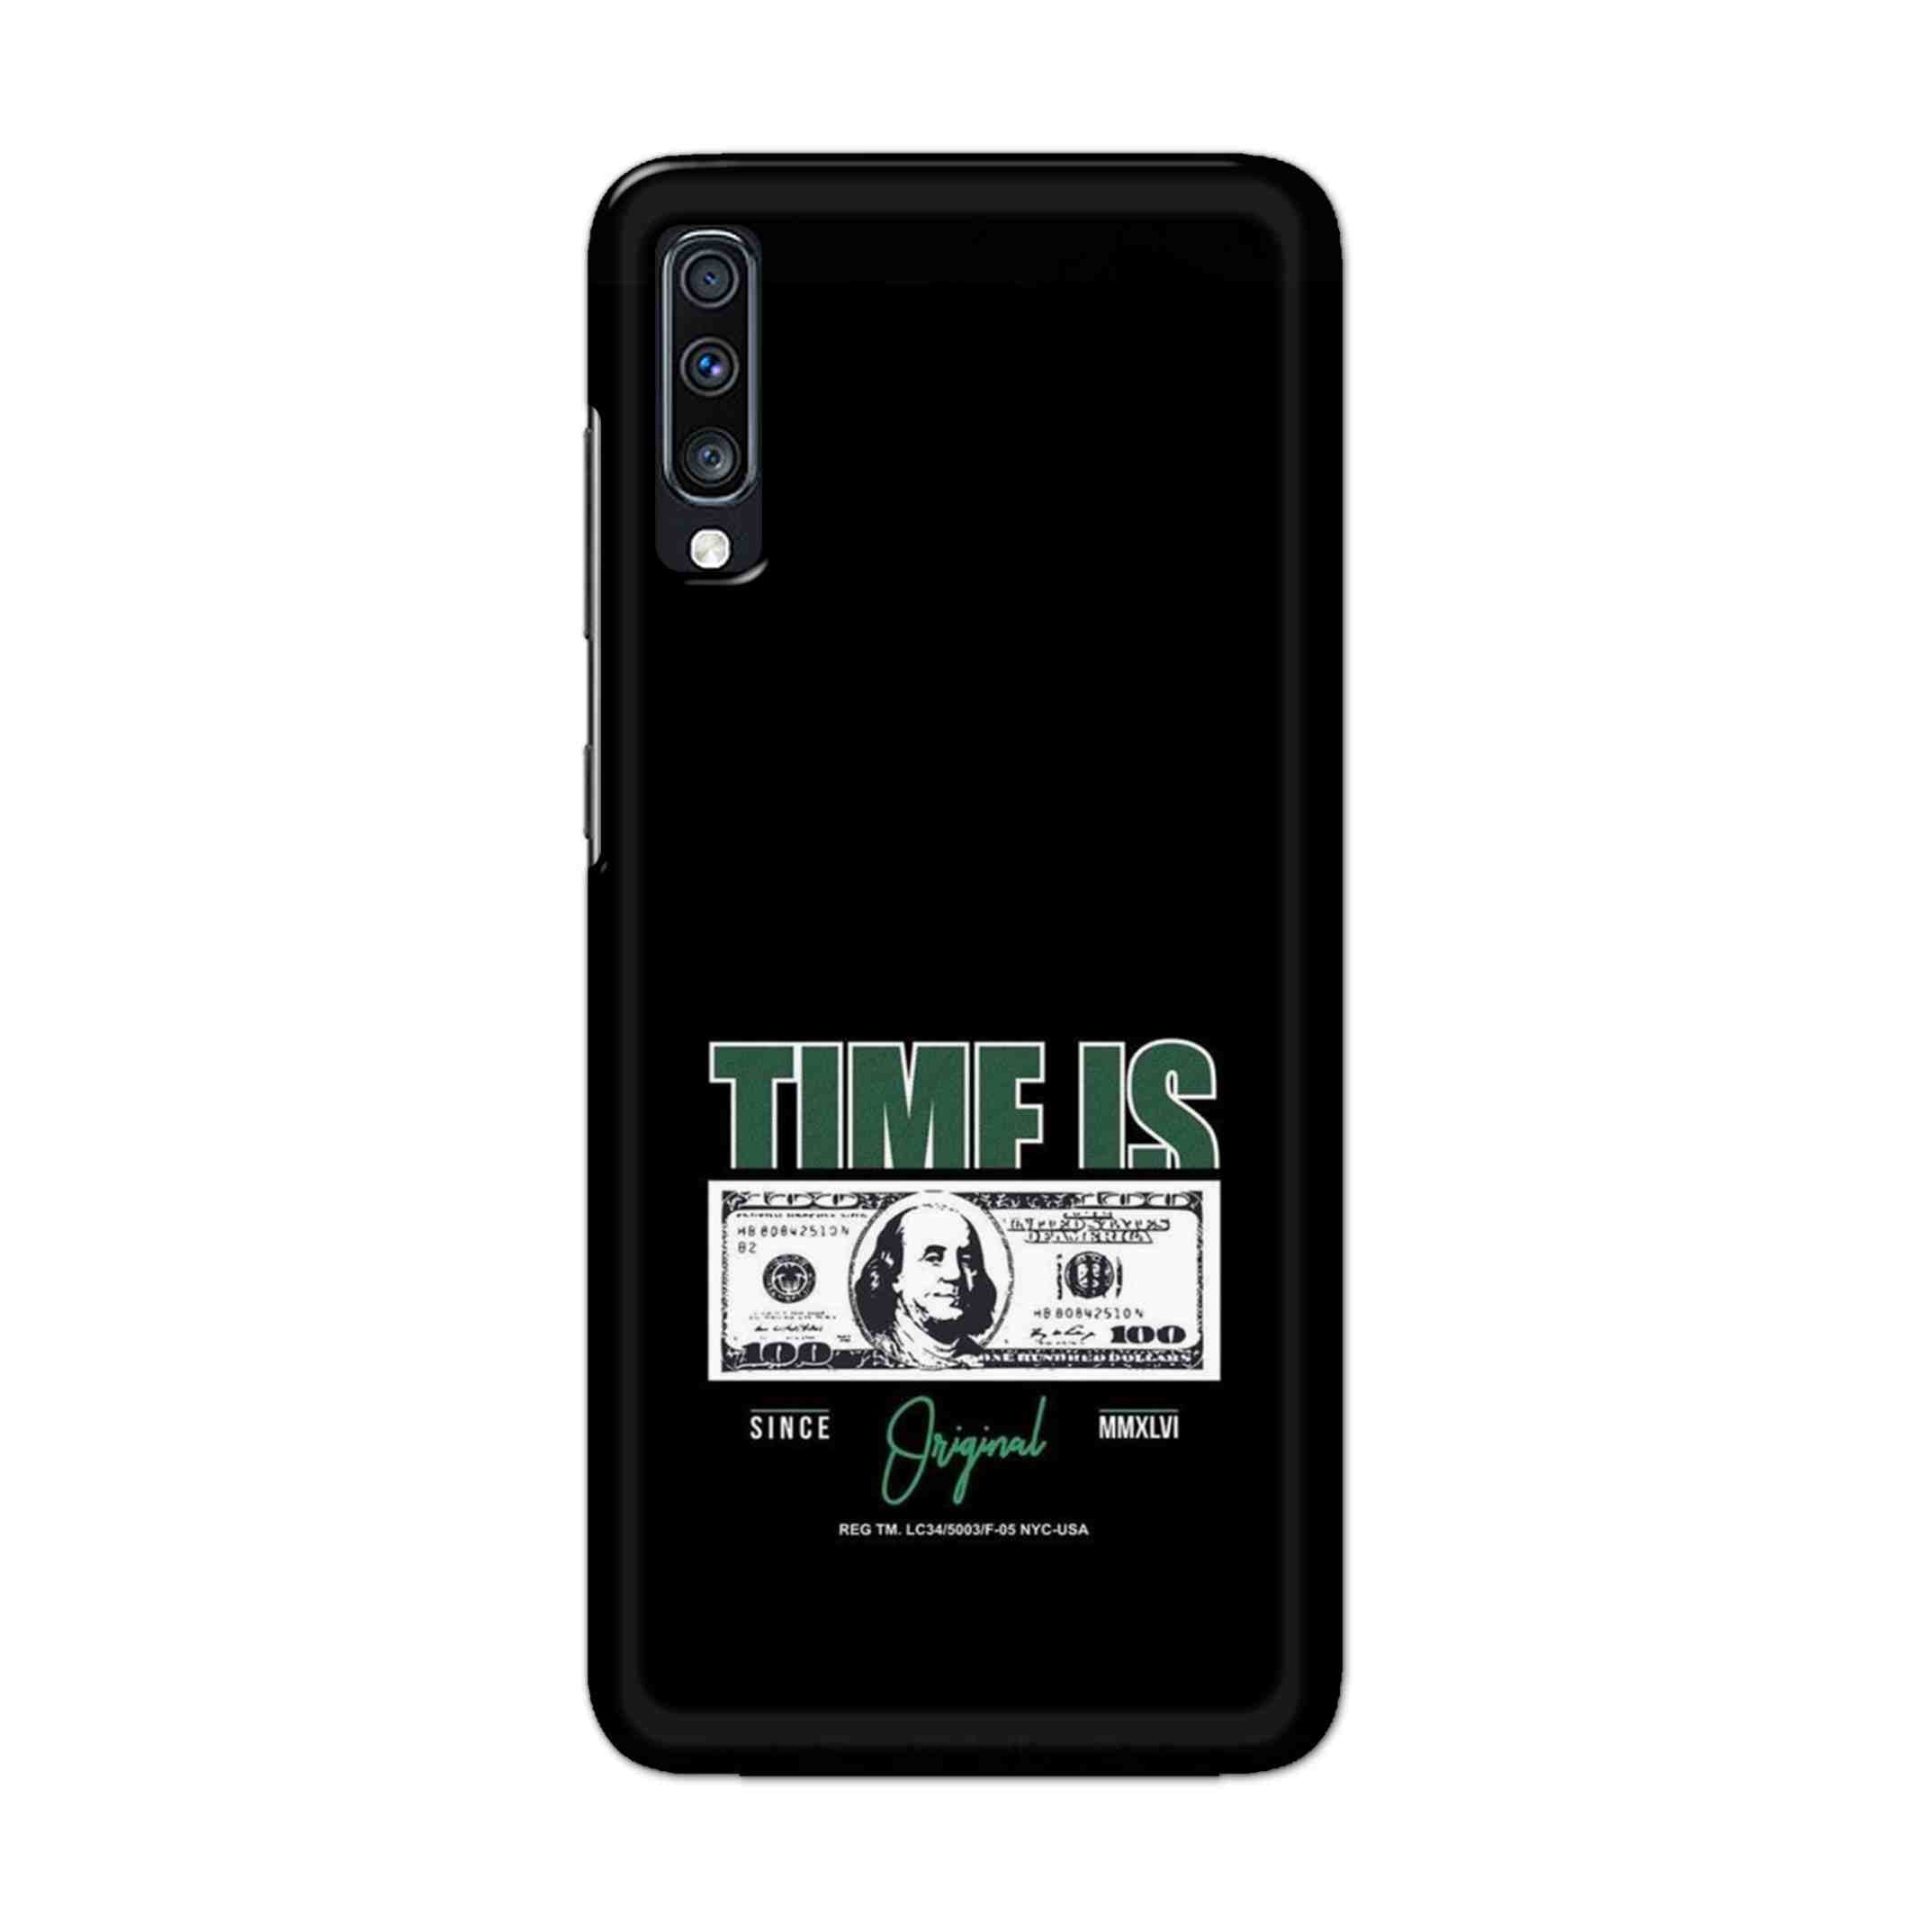 Buy Time Is Money Hard Back Mobile Phone Case Cover For Samsung Galaxy A70 Online